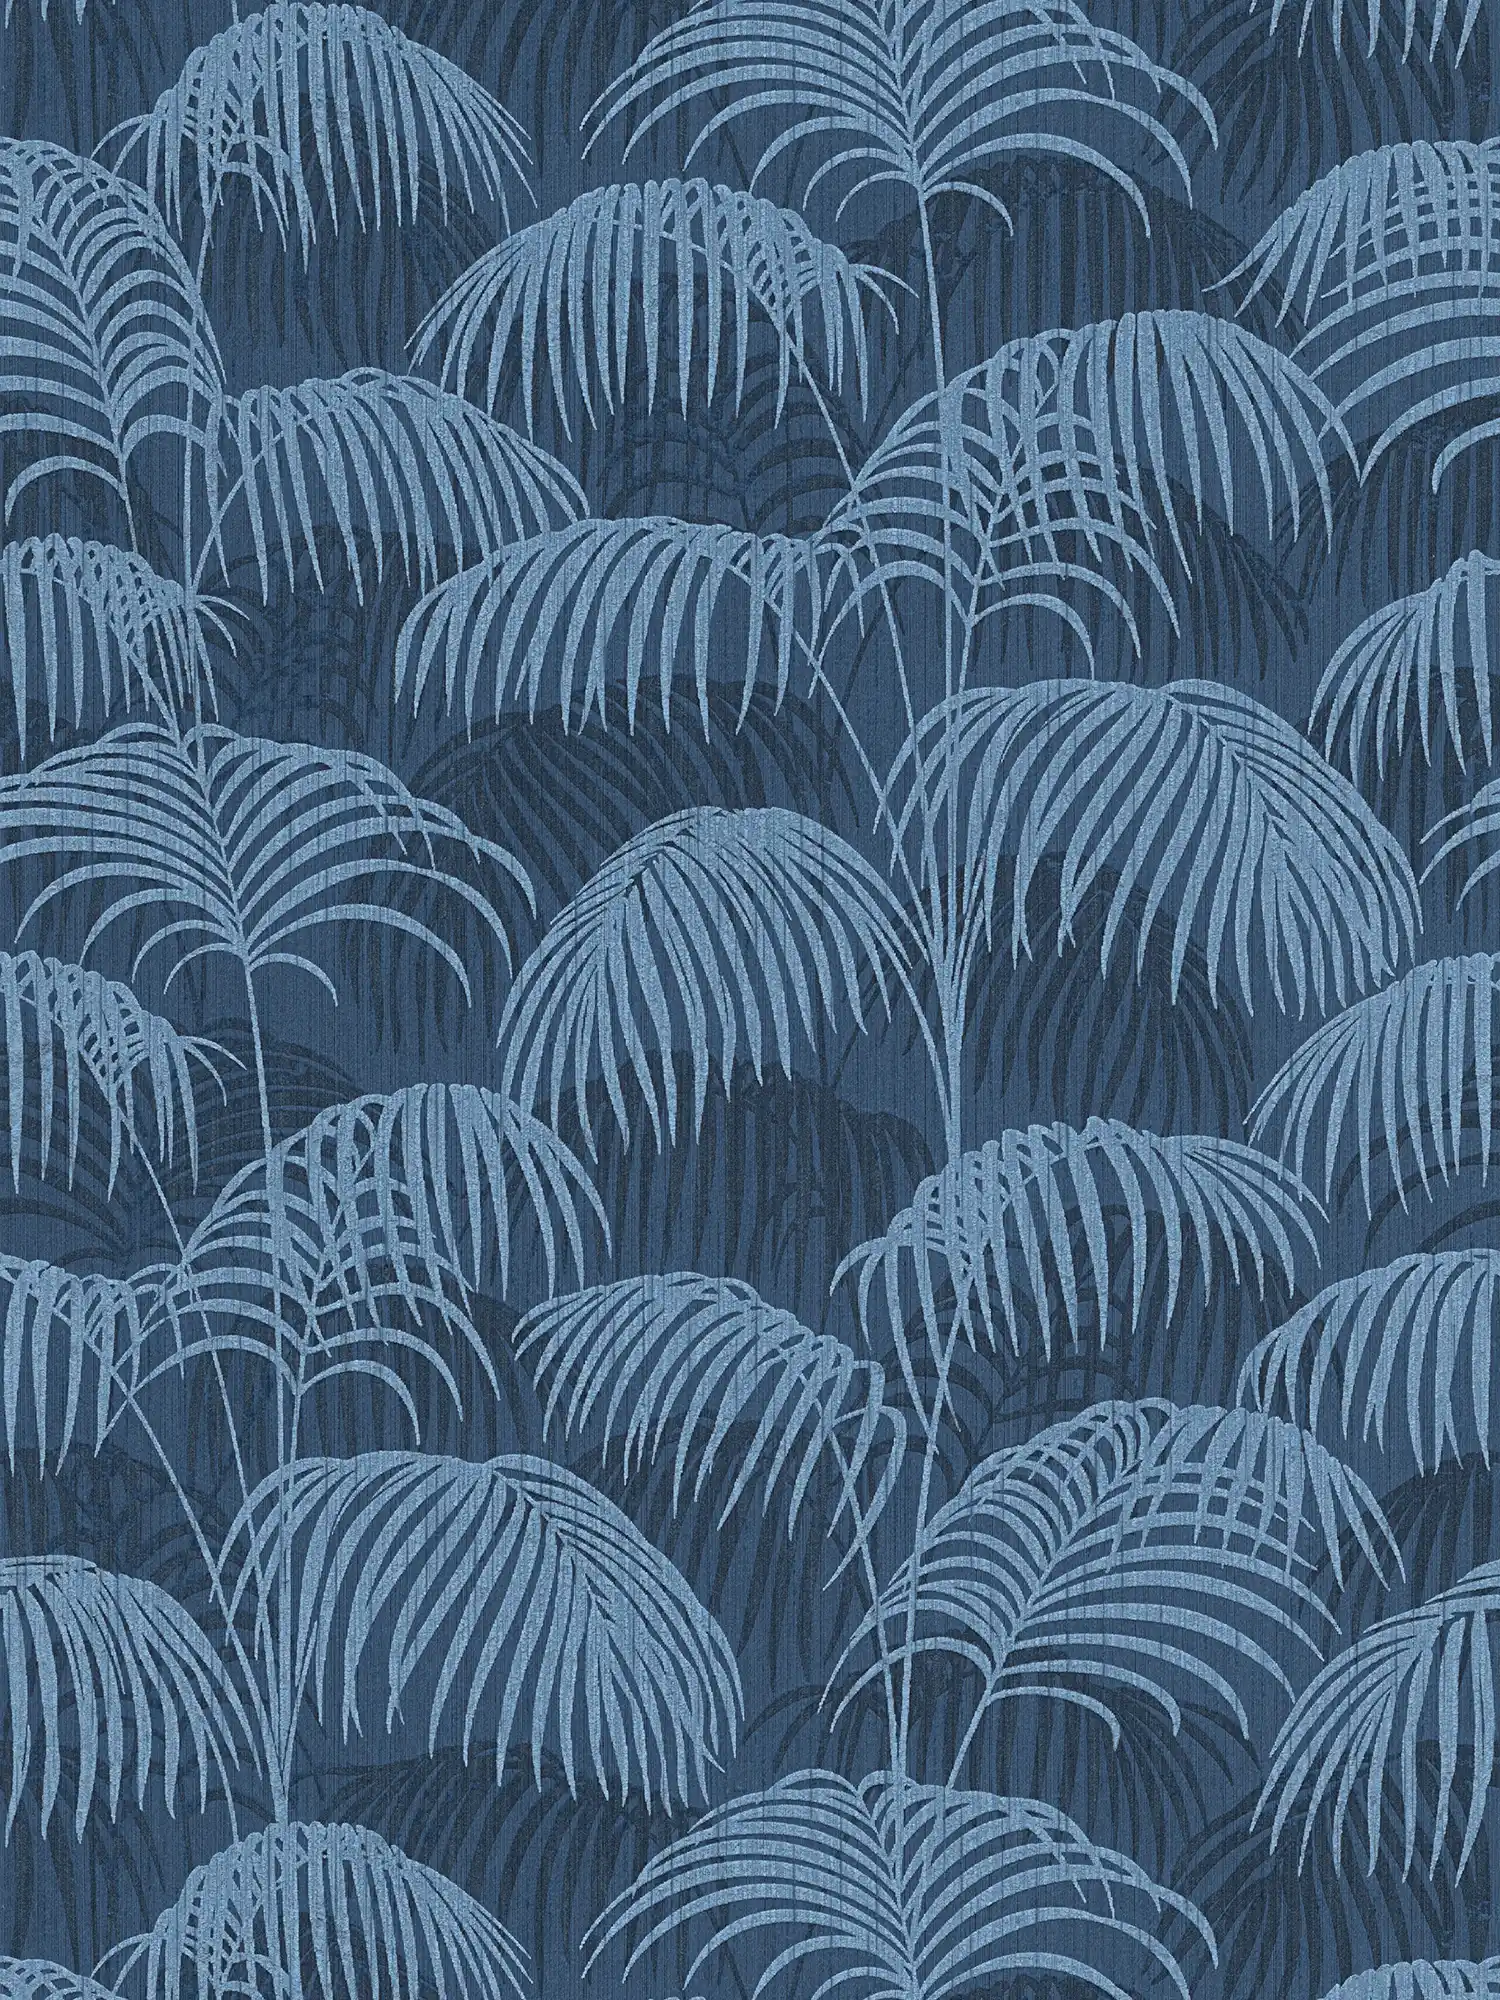 Wallpaper jungle leaves pattern colonial style - blue
